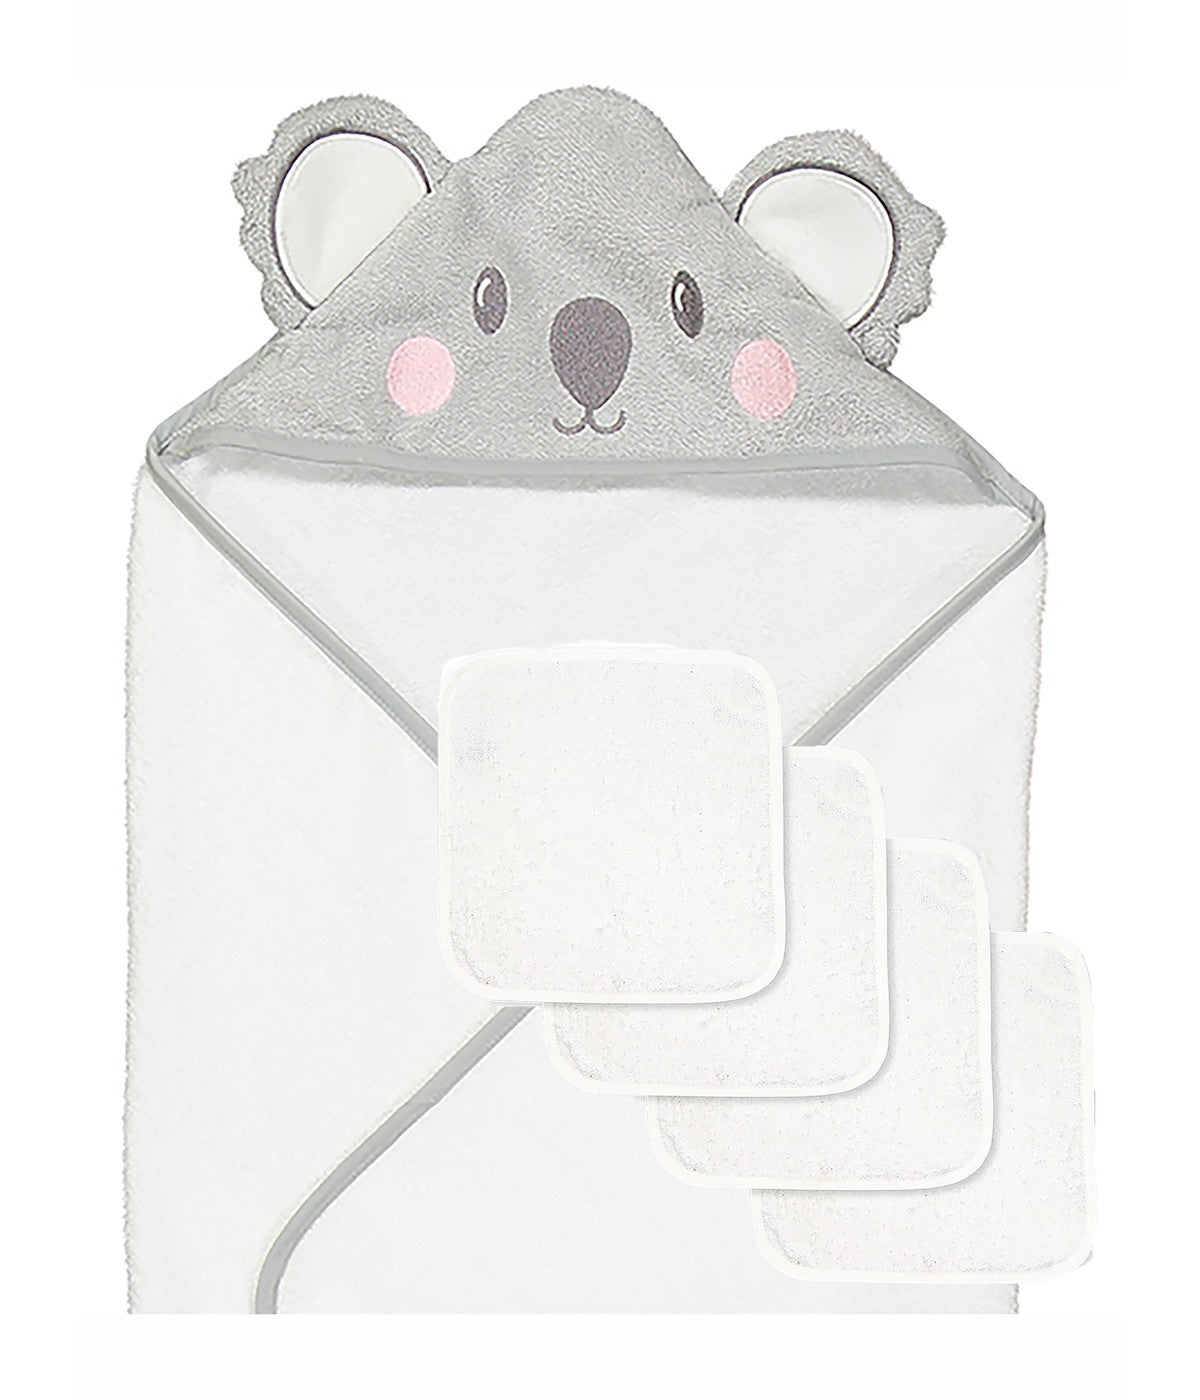 Baby Boys and Baby Girls Hooded Character Bath Towel with 4 Wash Cloths Gray